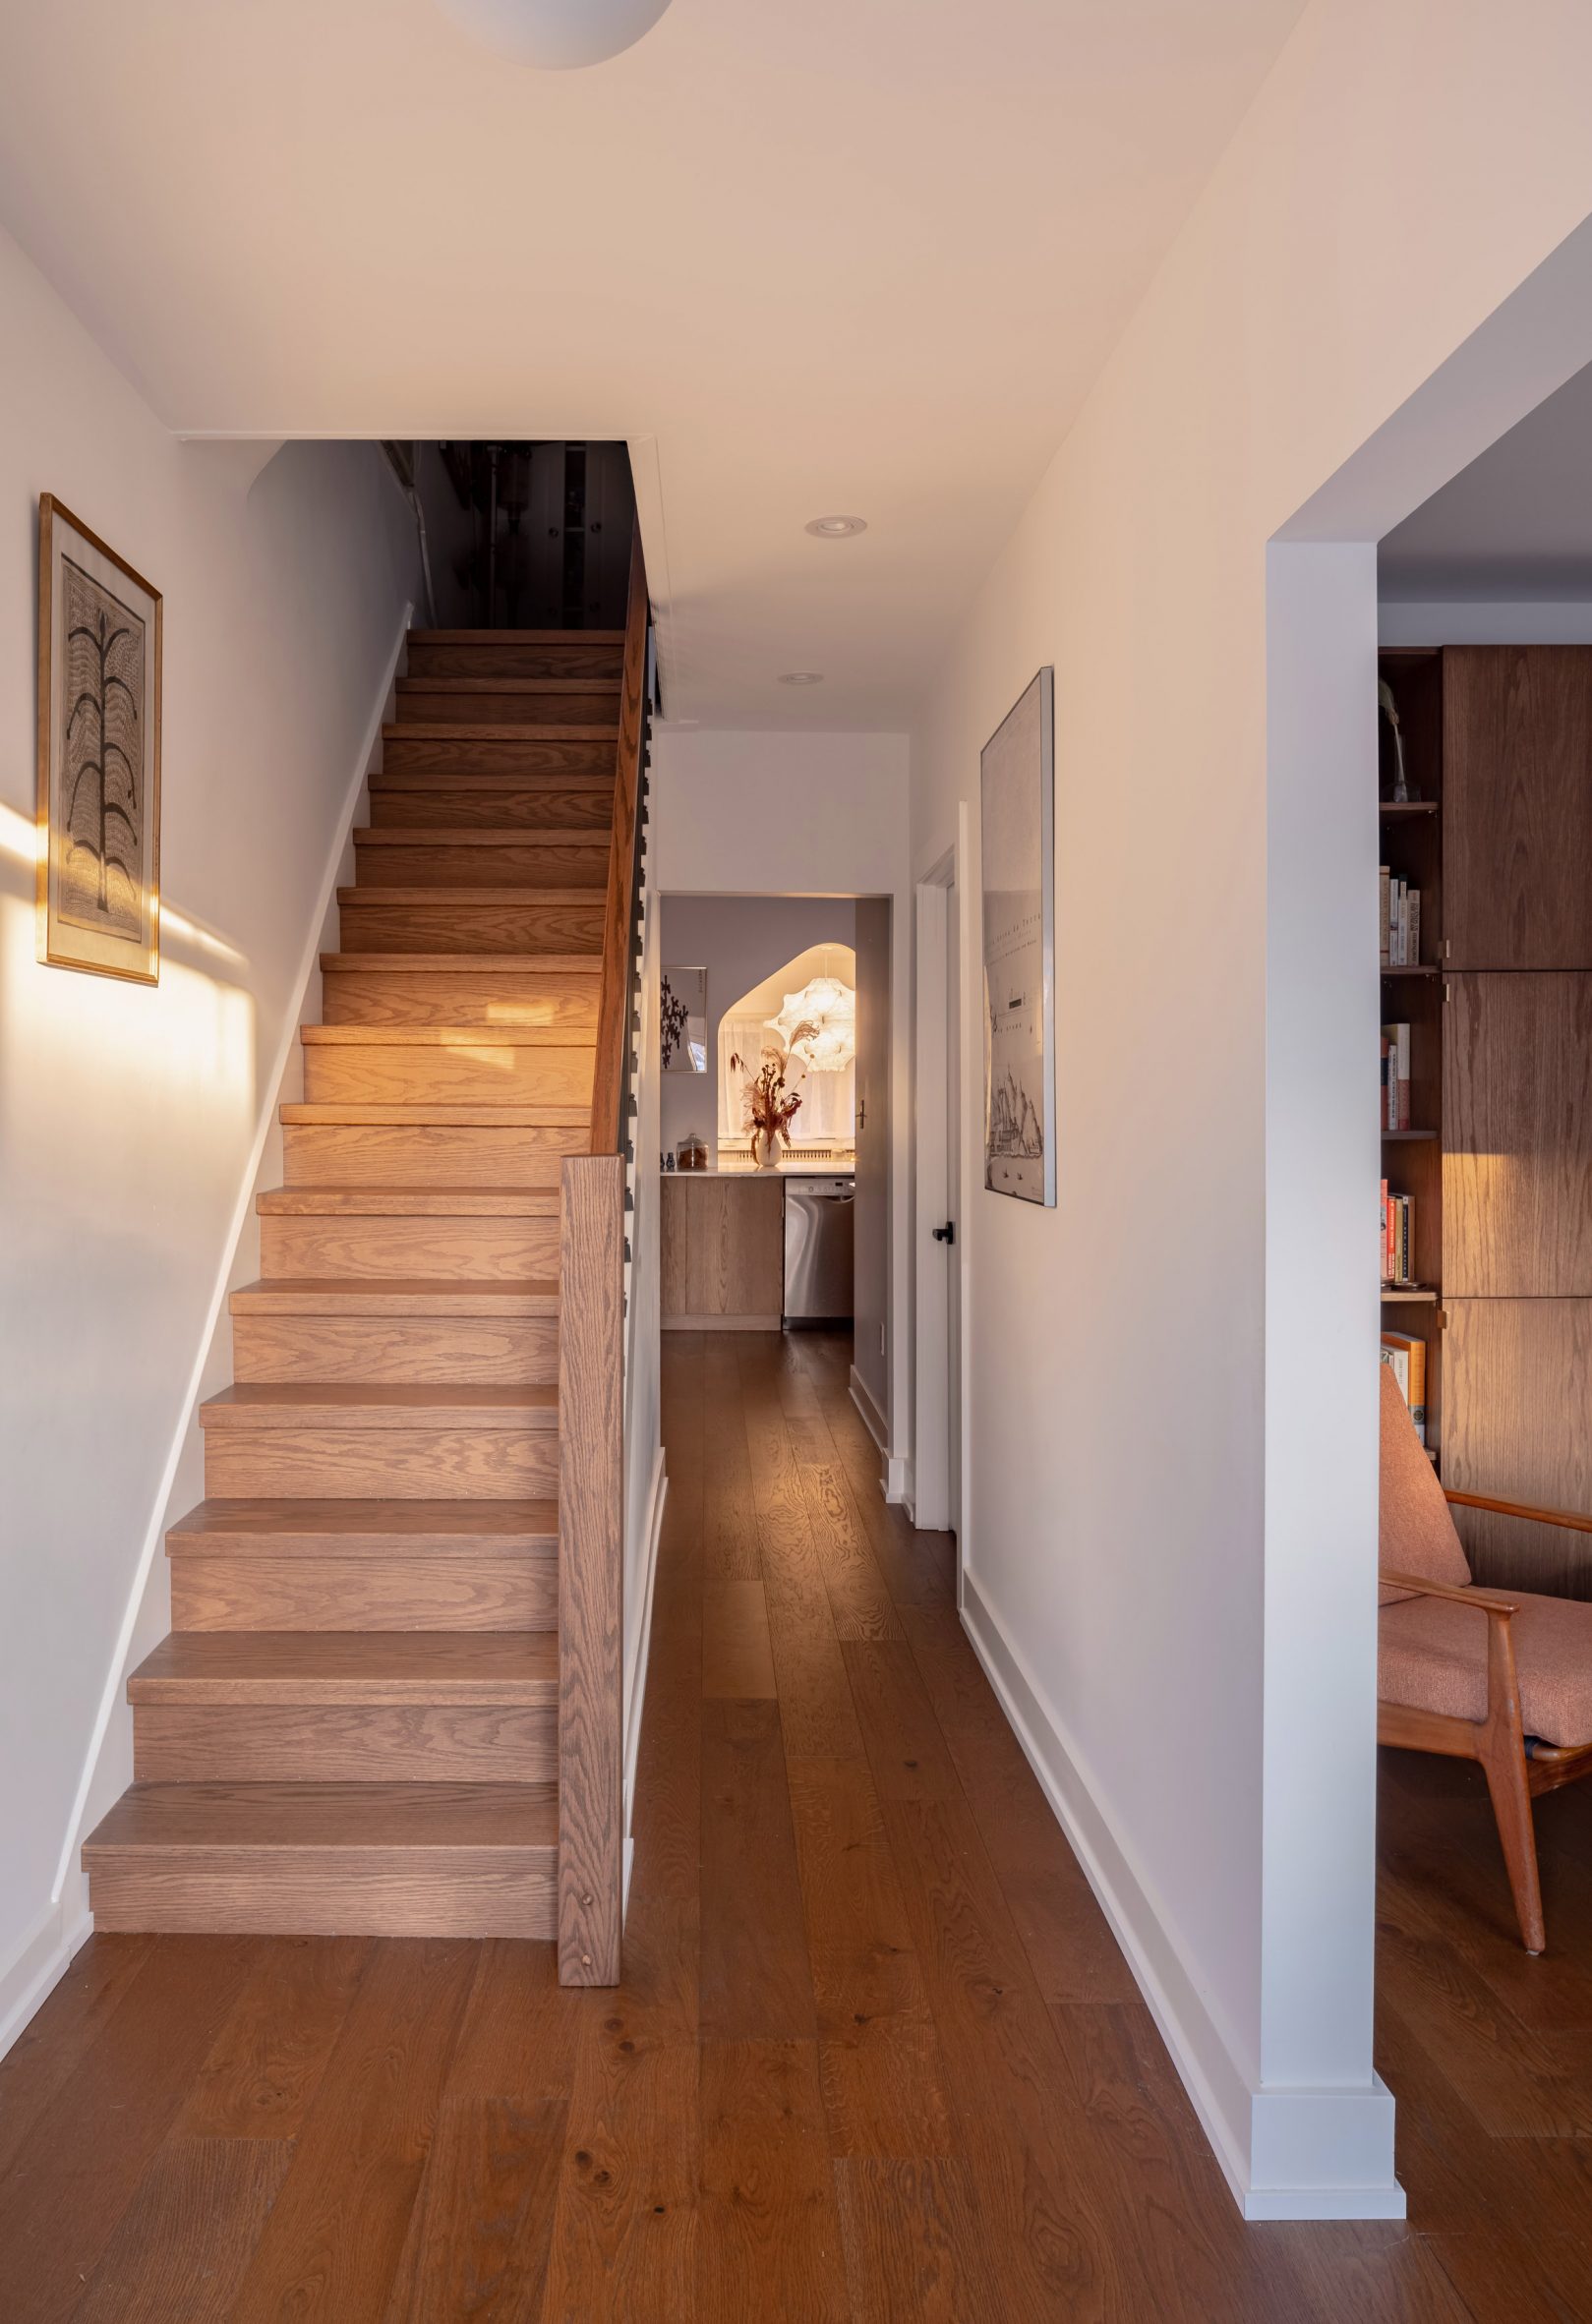 Hallway with dark oak flooring and a staircase